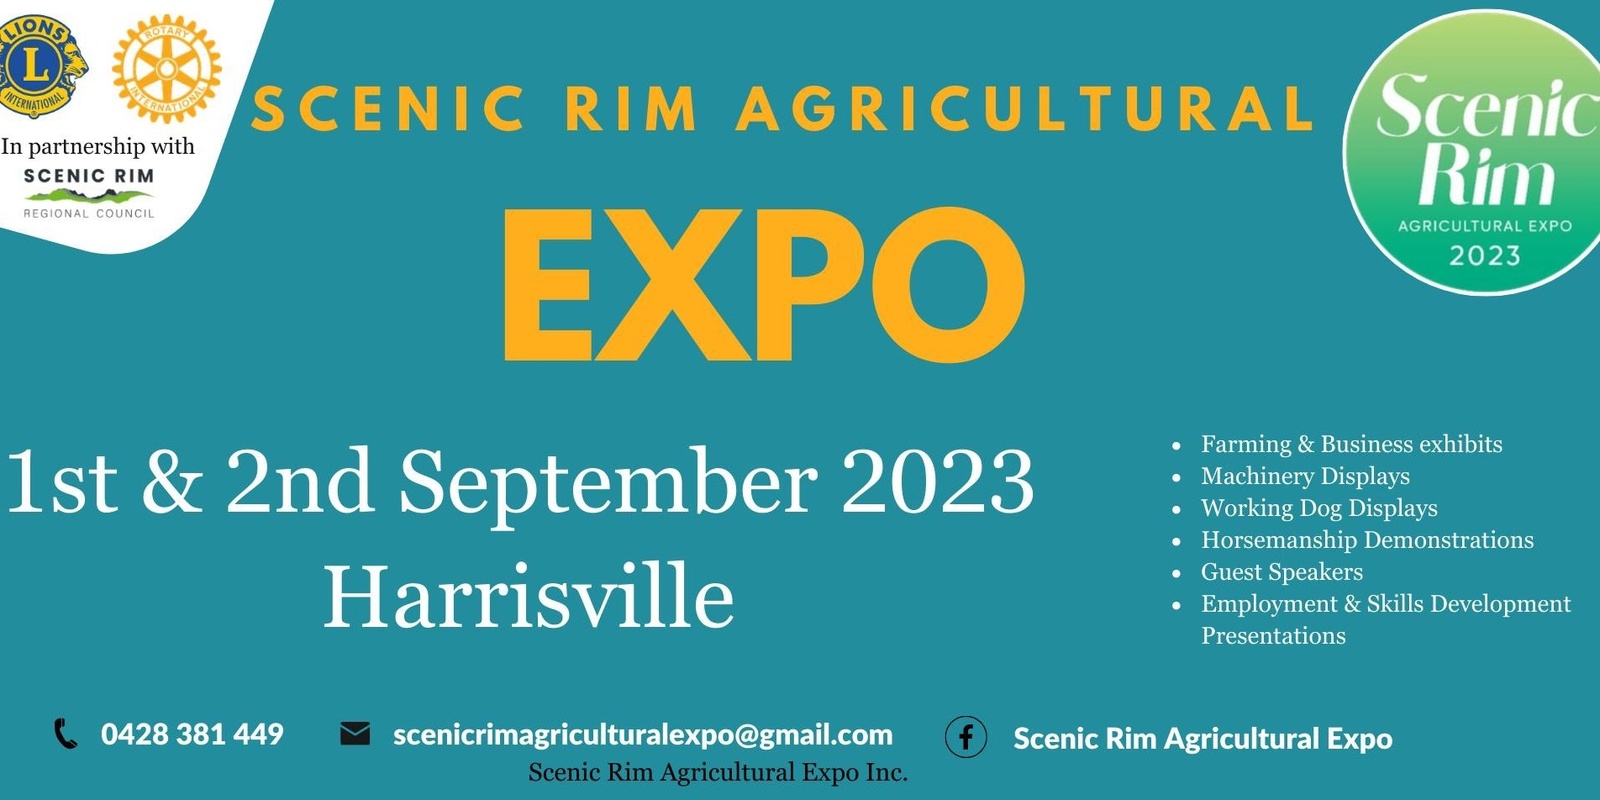 Banner image for Scenic Rim Agricultural Expo 2023 